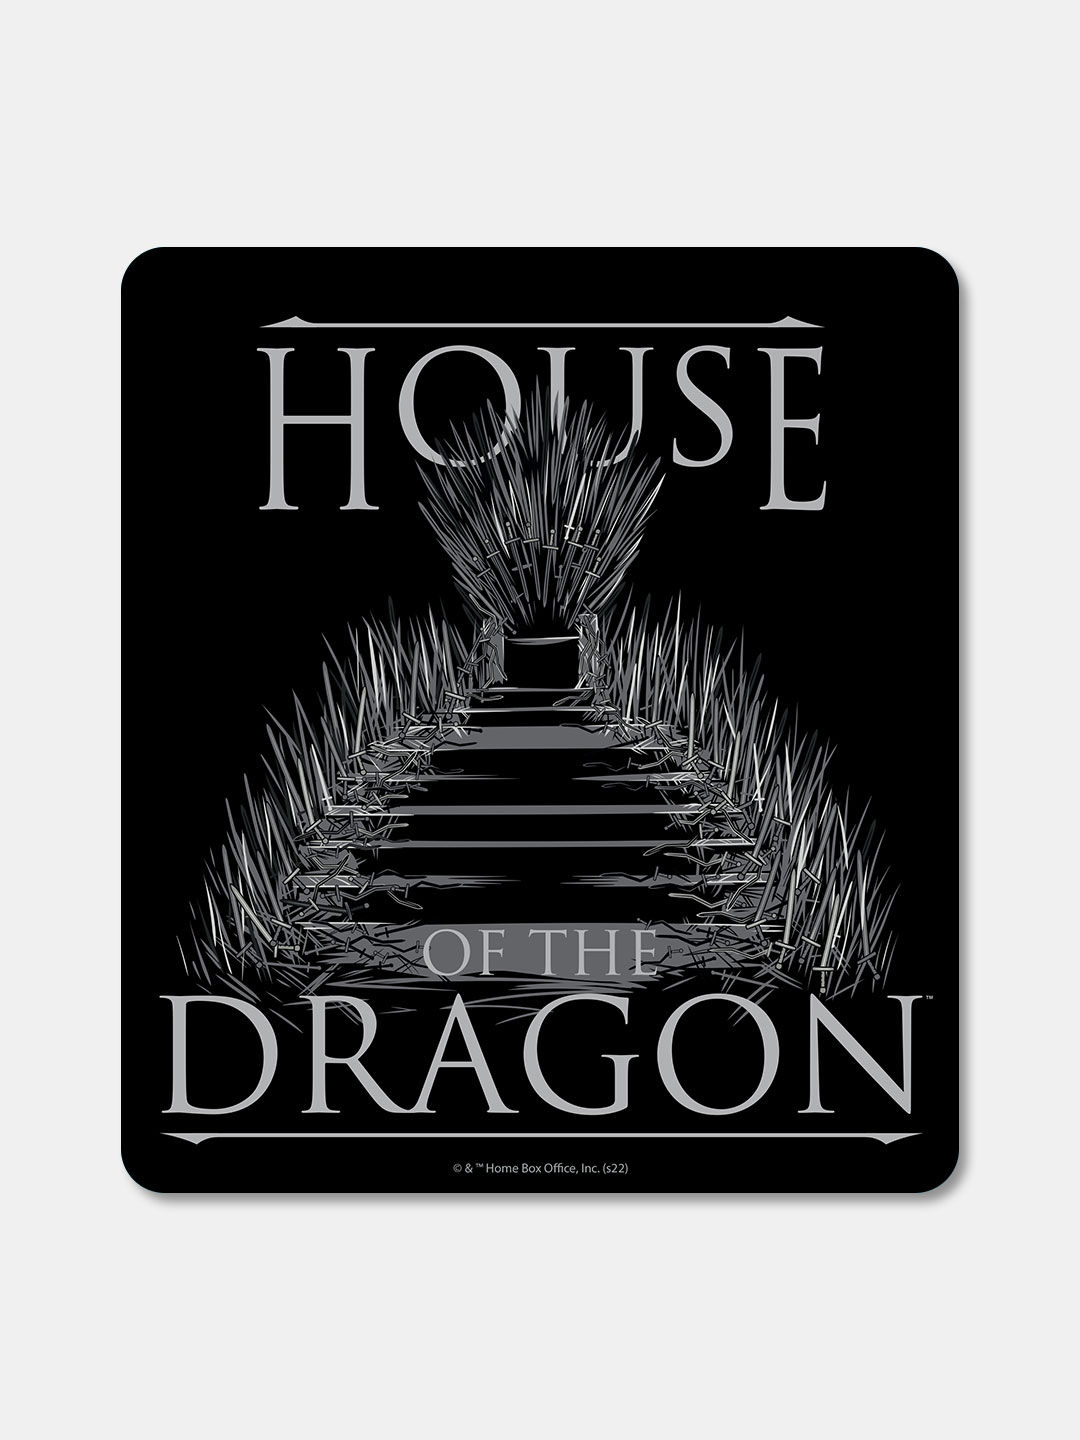 Buy HOD Iron Throne Graphic - Macmerise Mouse Pad Mouse Pads Online